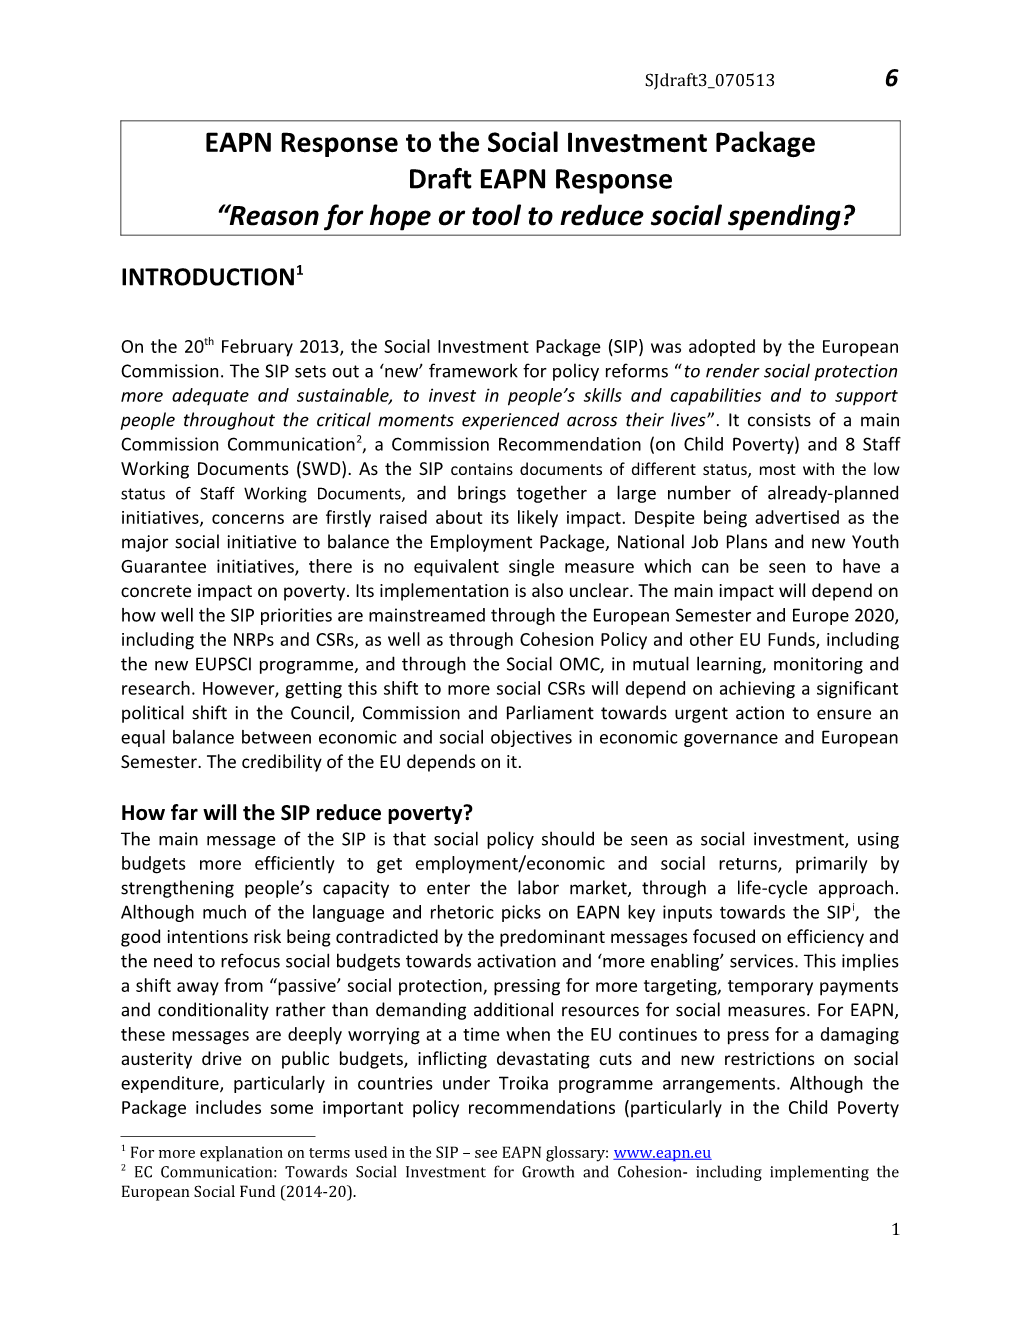 EAPN Response to the Social Investment Package